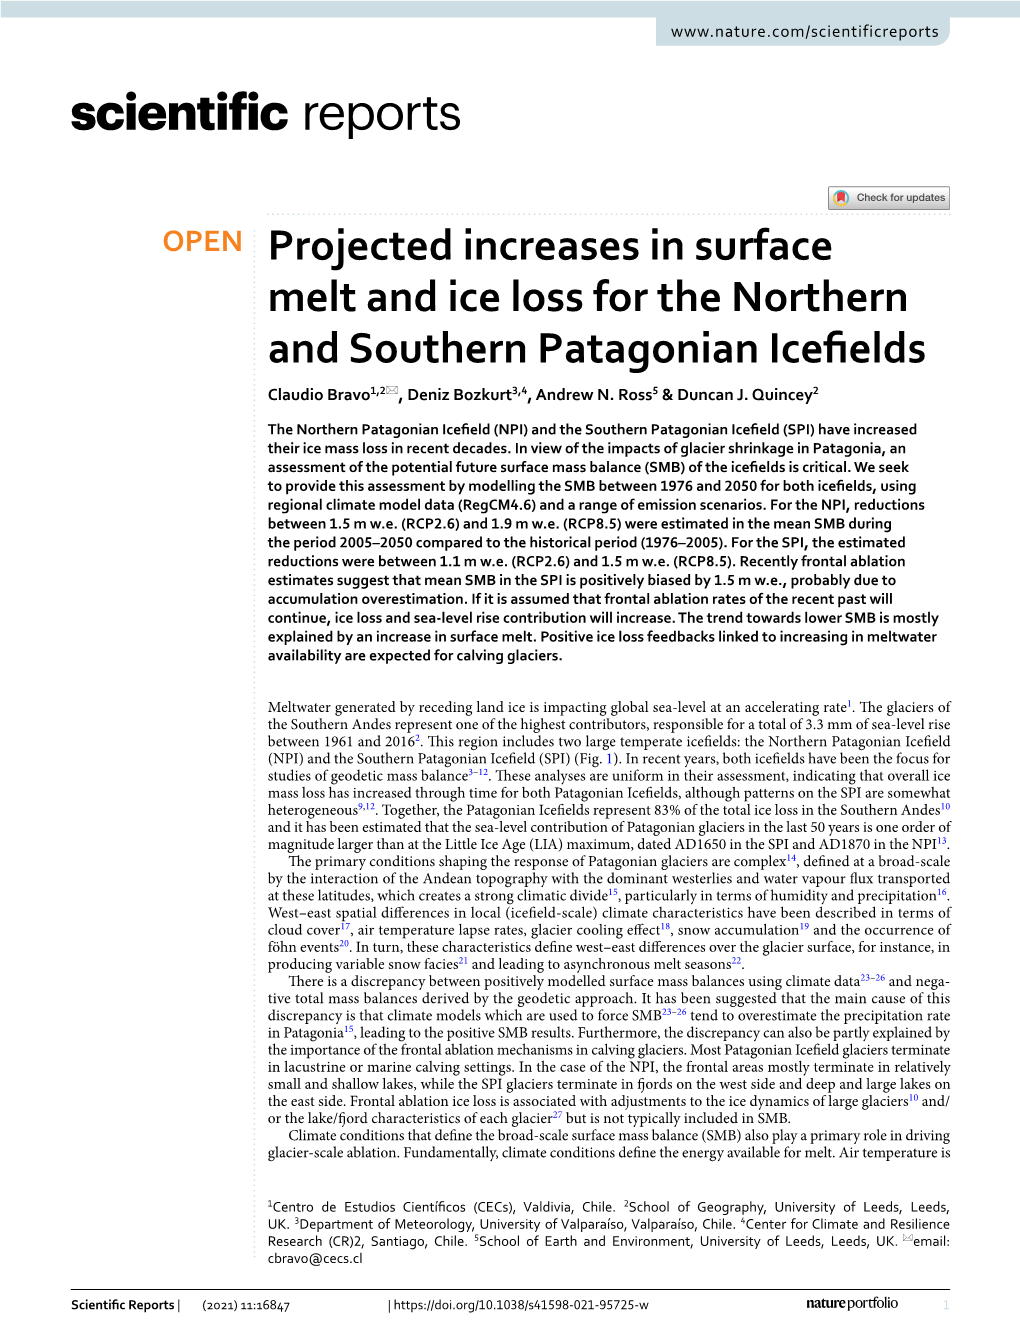 Projected Increases in Surface Melt and Ice Loss for the Northern and Southern Patagonian Icefelds Claudio Bravo1,2*, Deniz Bozkurt3,4, Andrew N